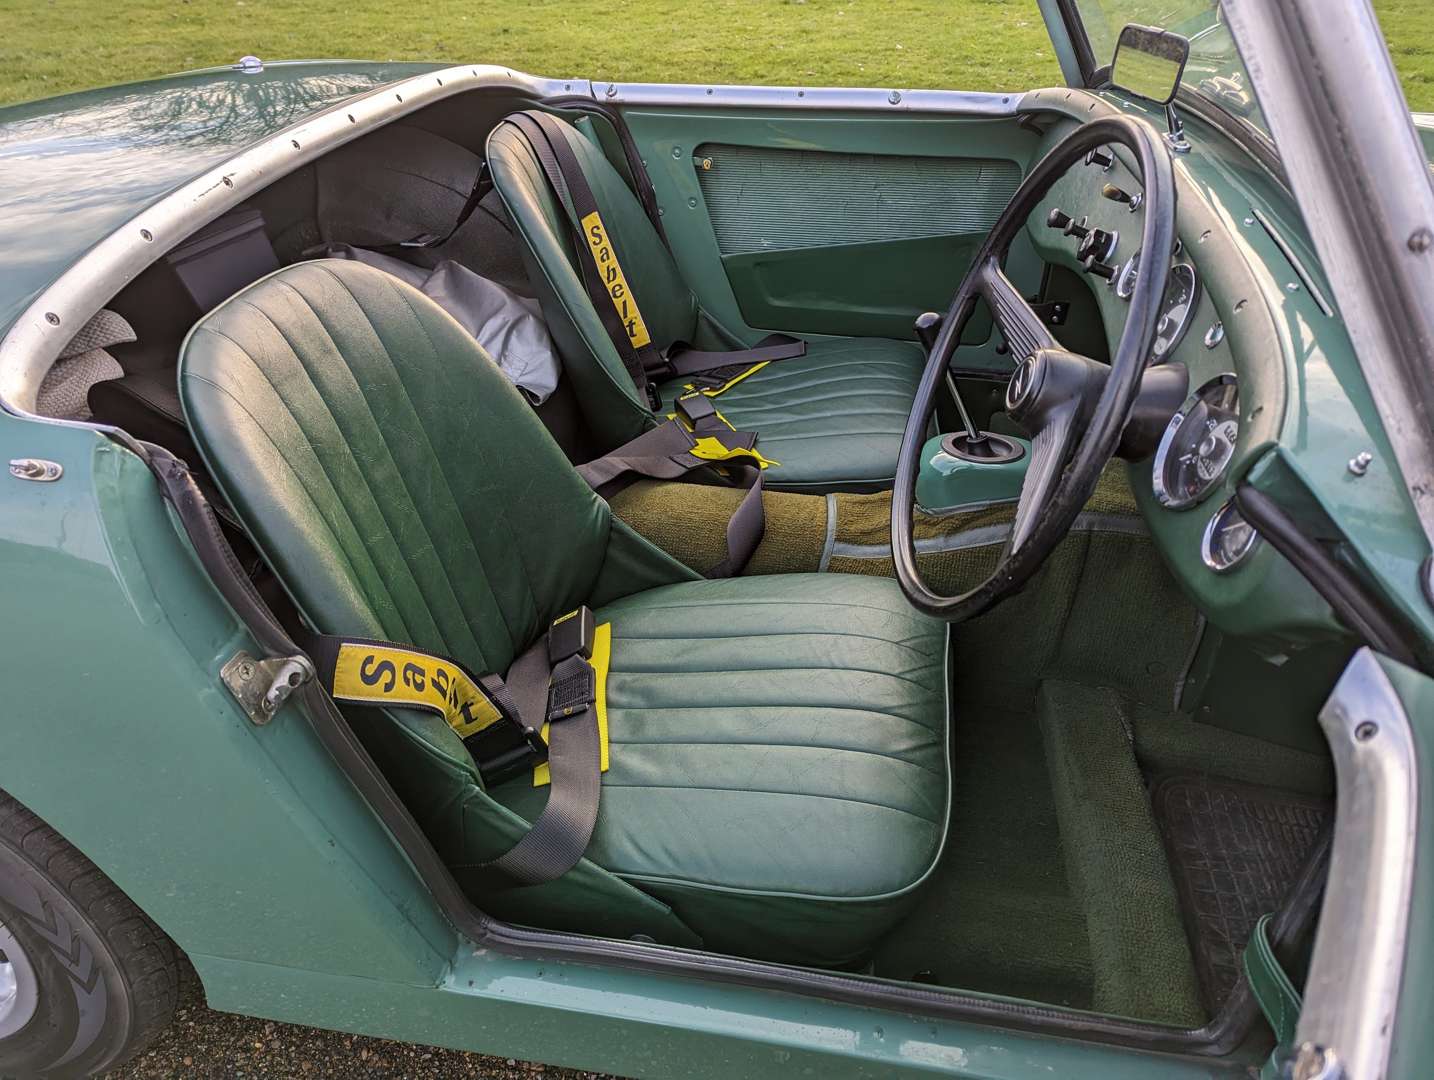 <p>1960 AUSTIN HEALEY SPRITE “FROGEYE” SUPERCHARGER</p>